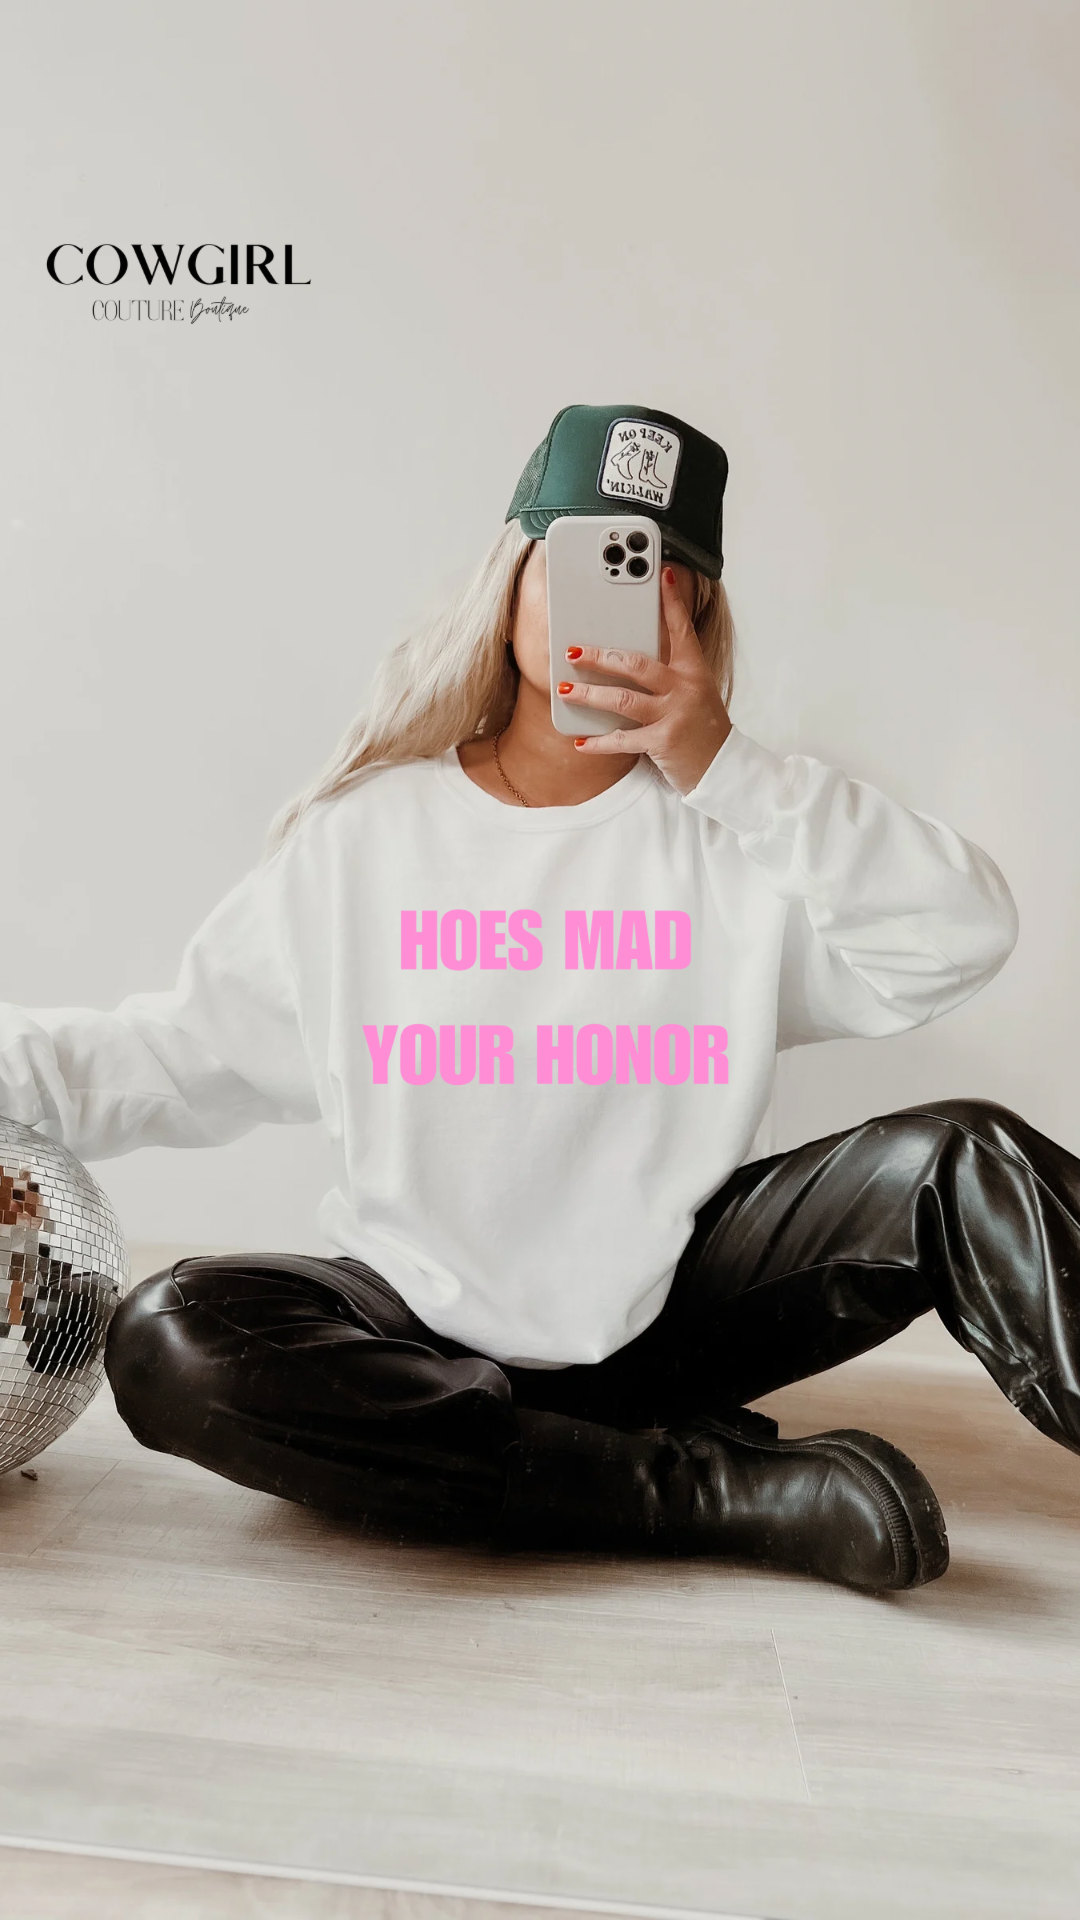 Hoes mad your honor